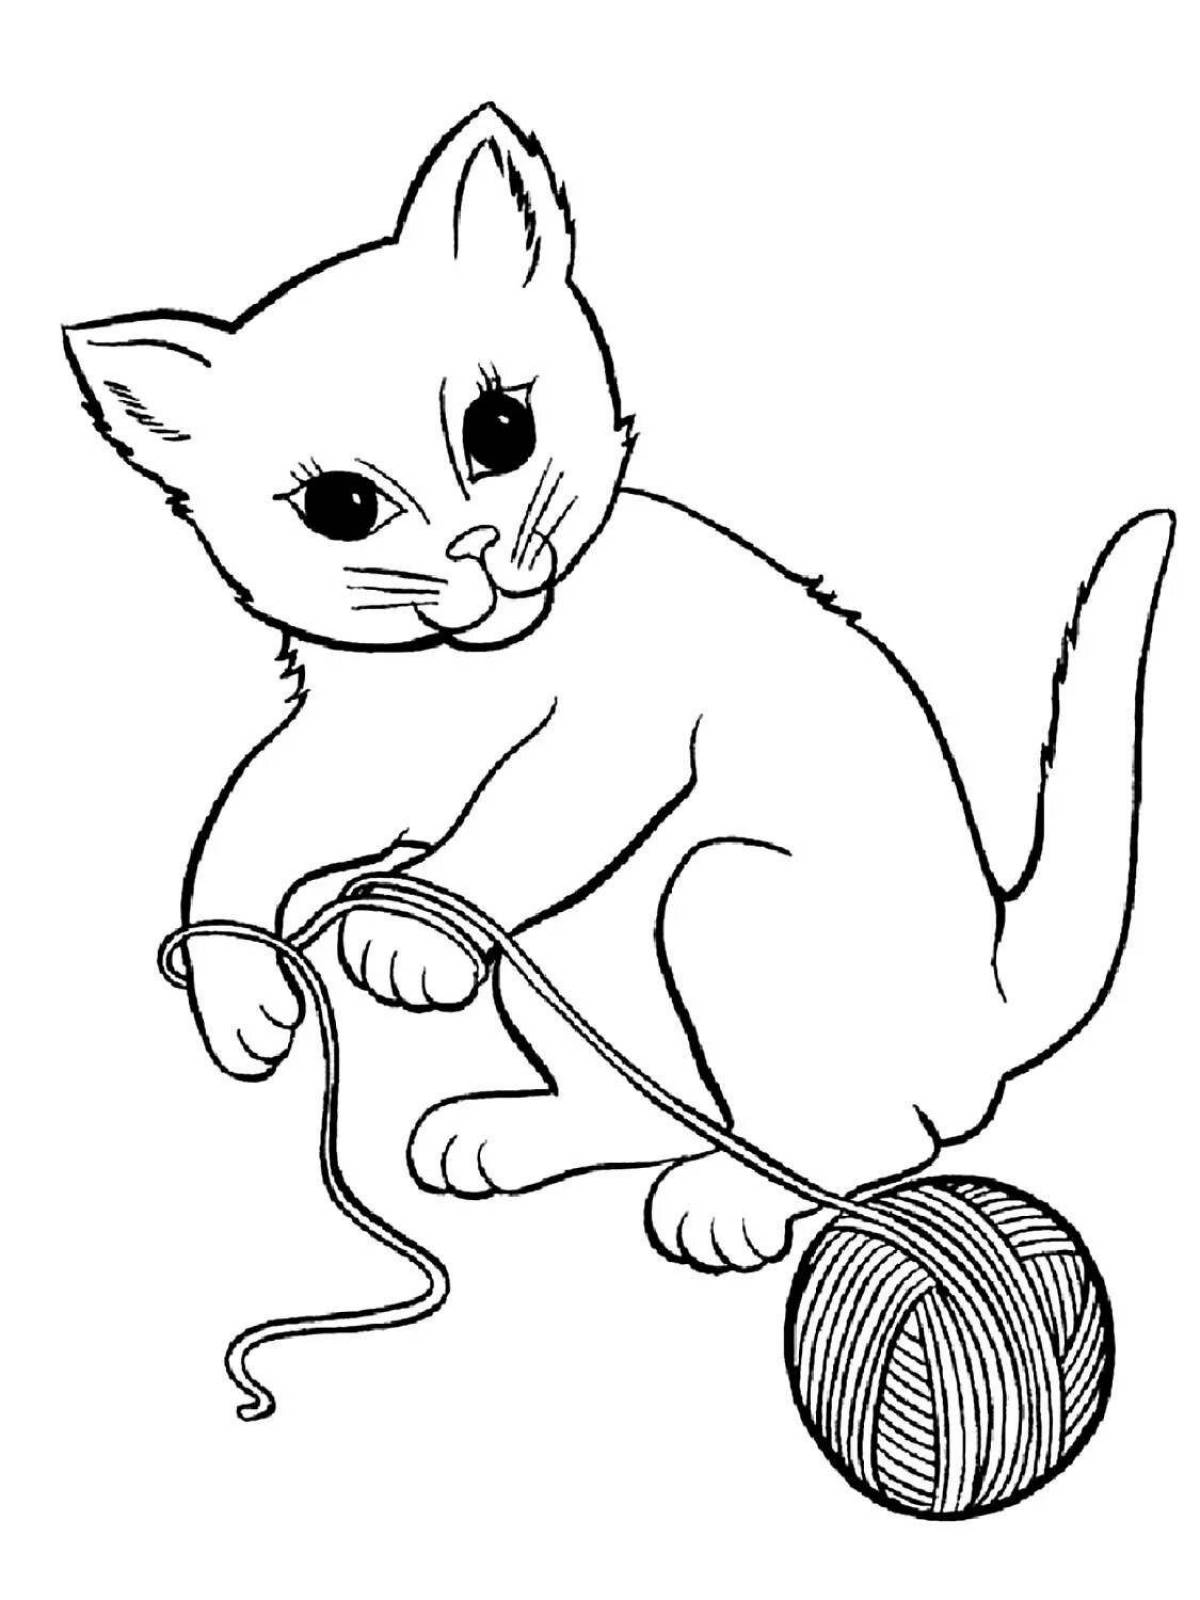 Creative drawing of a kitten